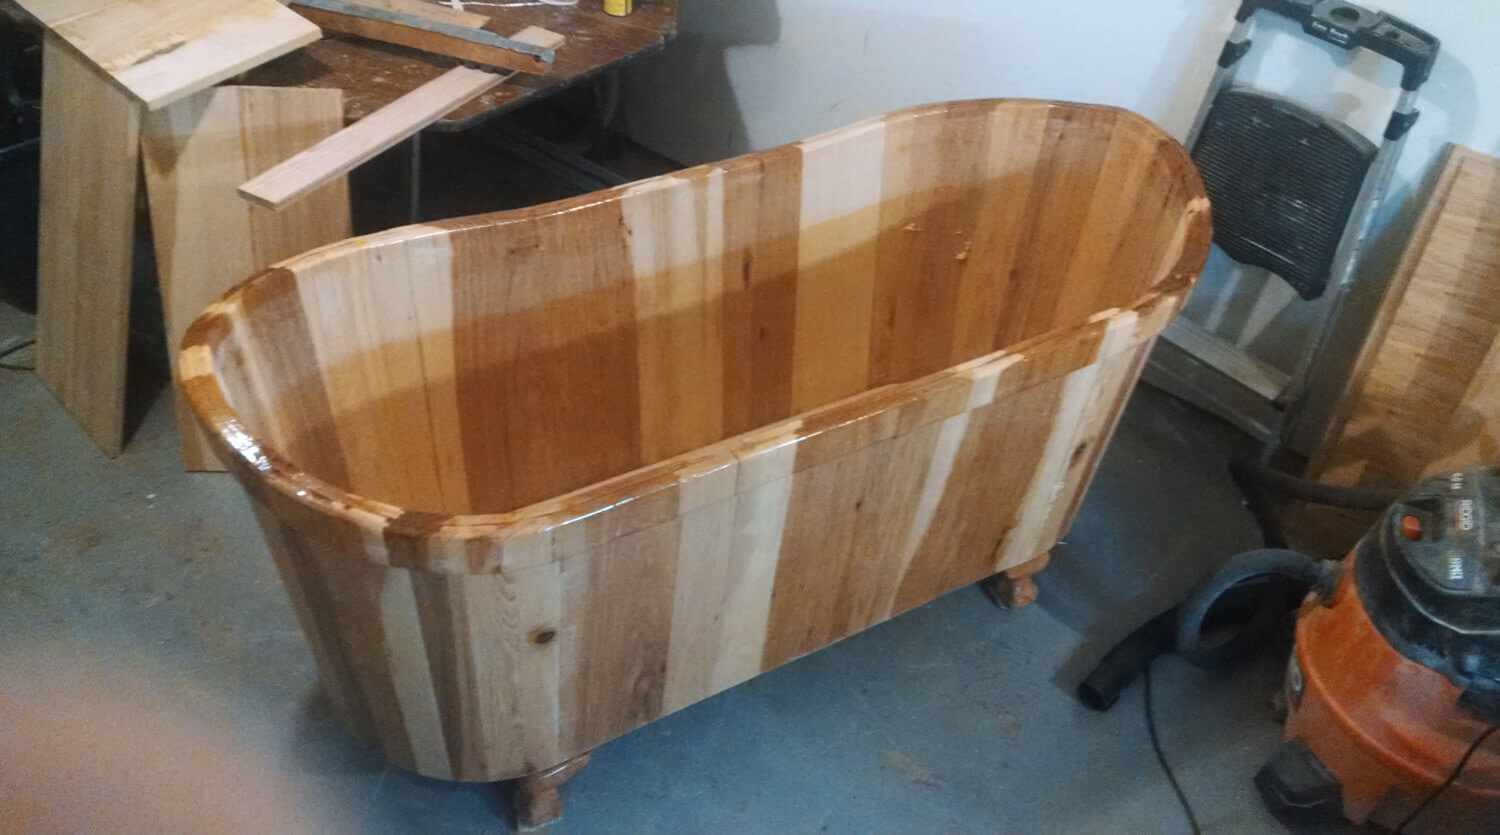 A hickory wood tub from etsy seller Driftwood Tubs